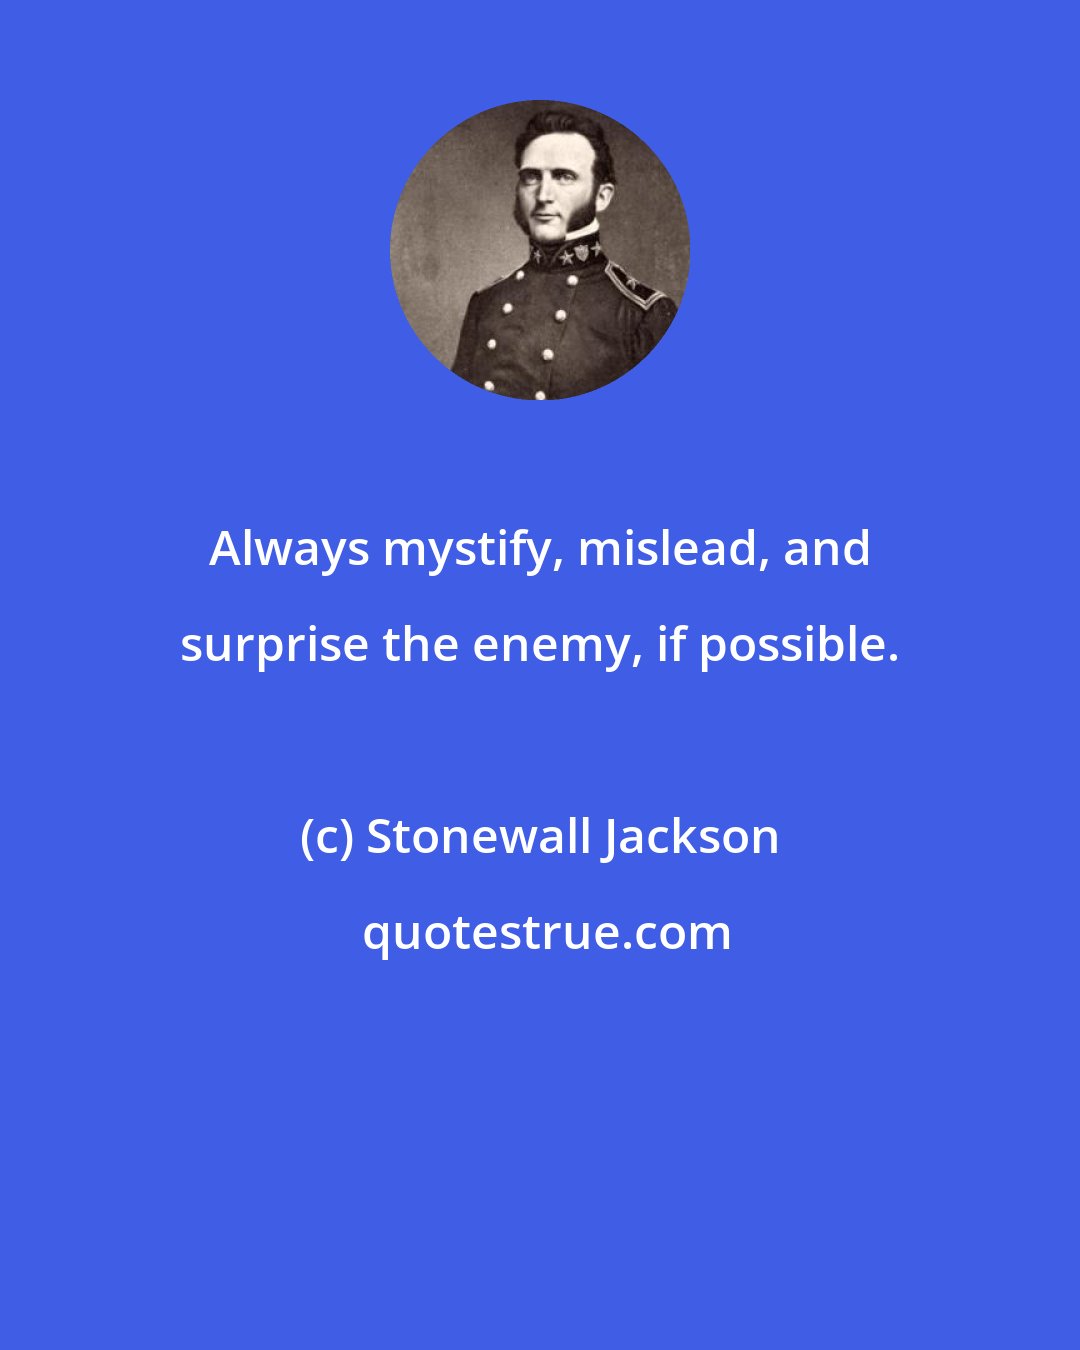 Stonewall Jackson: Always mystify, mislead, and surprise the enemy, if possible.